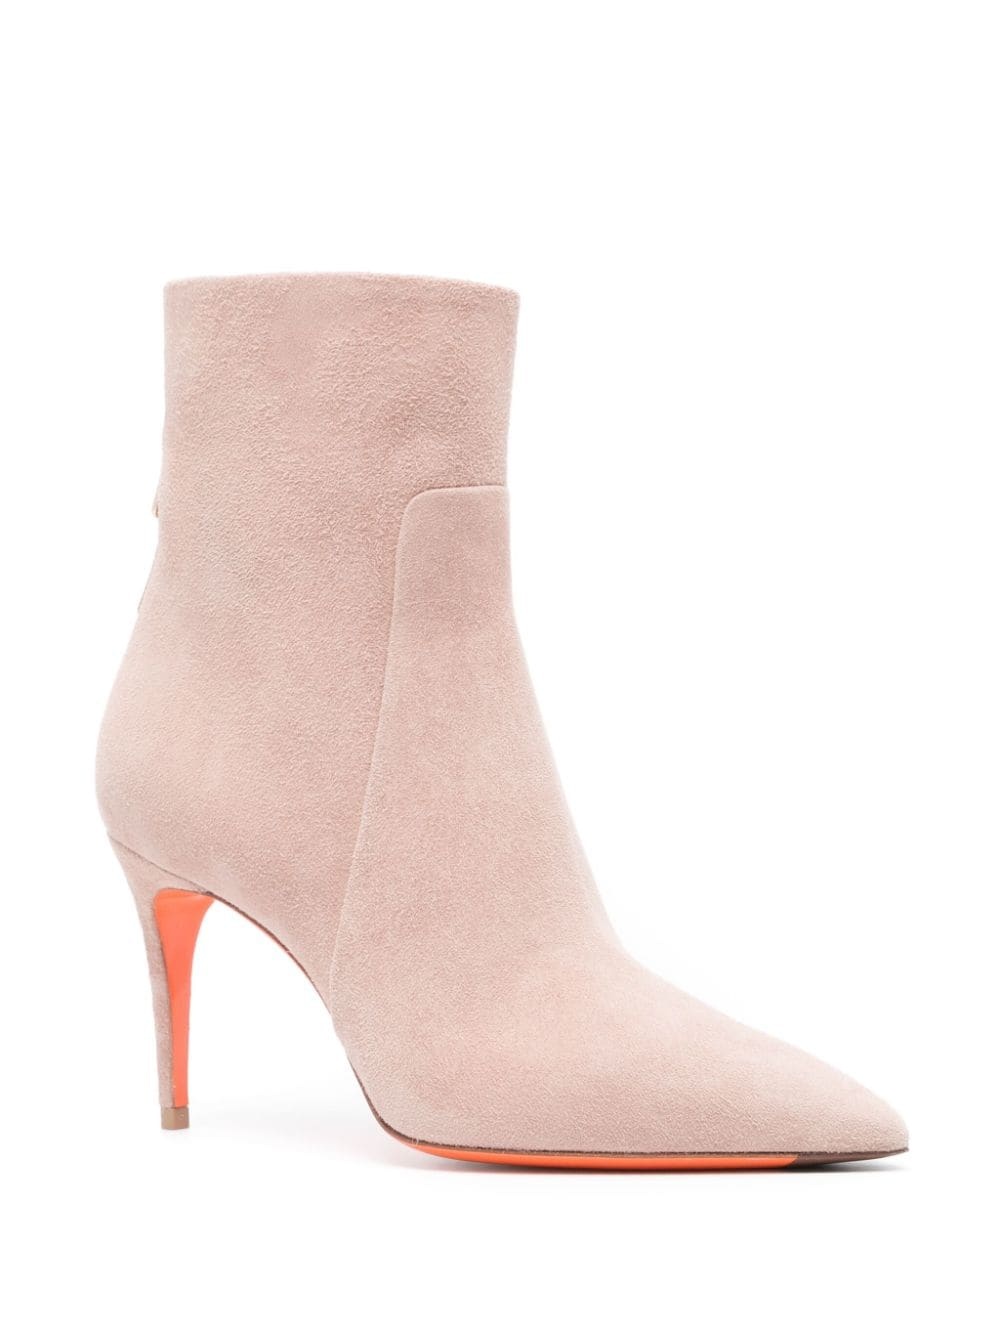 65mm suede ankle boots - 2